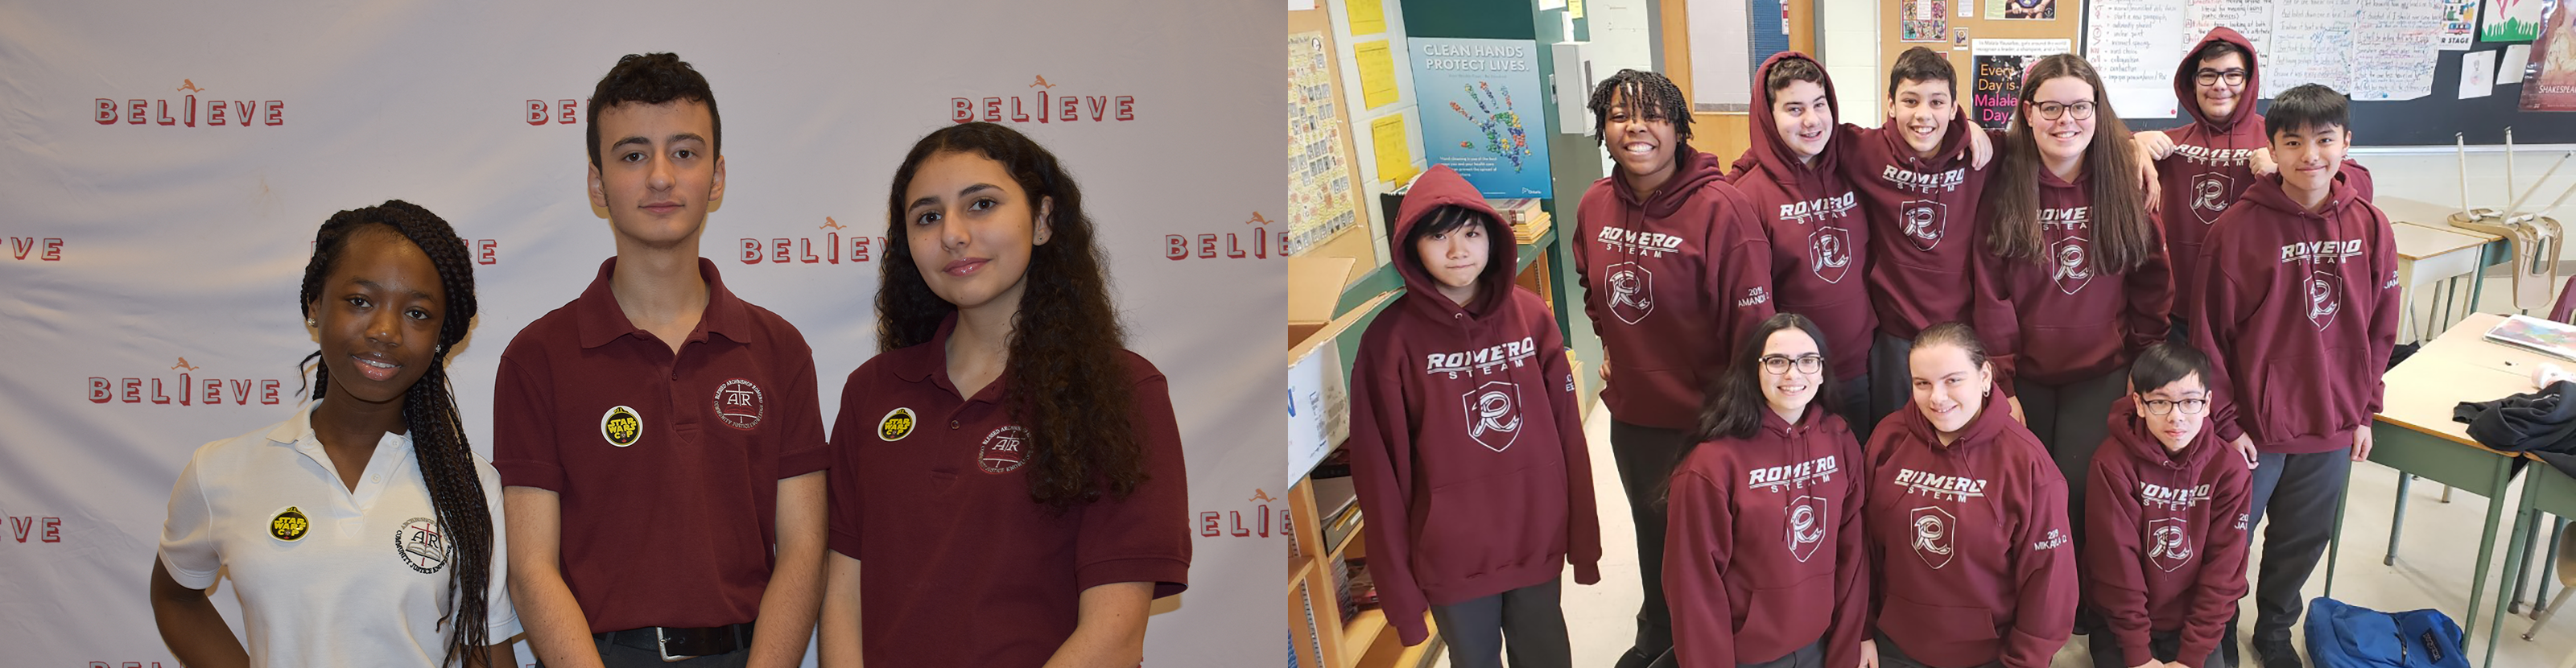 Left picture is three Oscar Romero students posing in the St. Oscar Romero school uniform, one in white uniform and two in red uniforms. Right picture is a group of ten students posing together in red St. Oscar Romero hoodies.